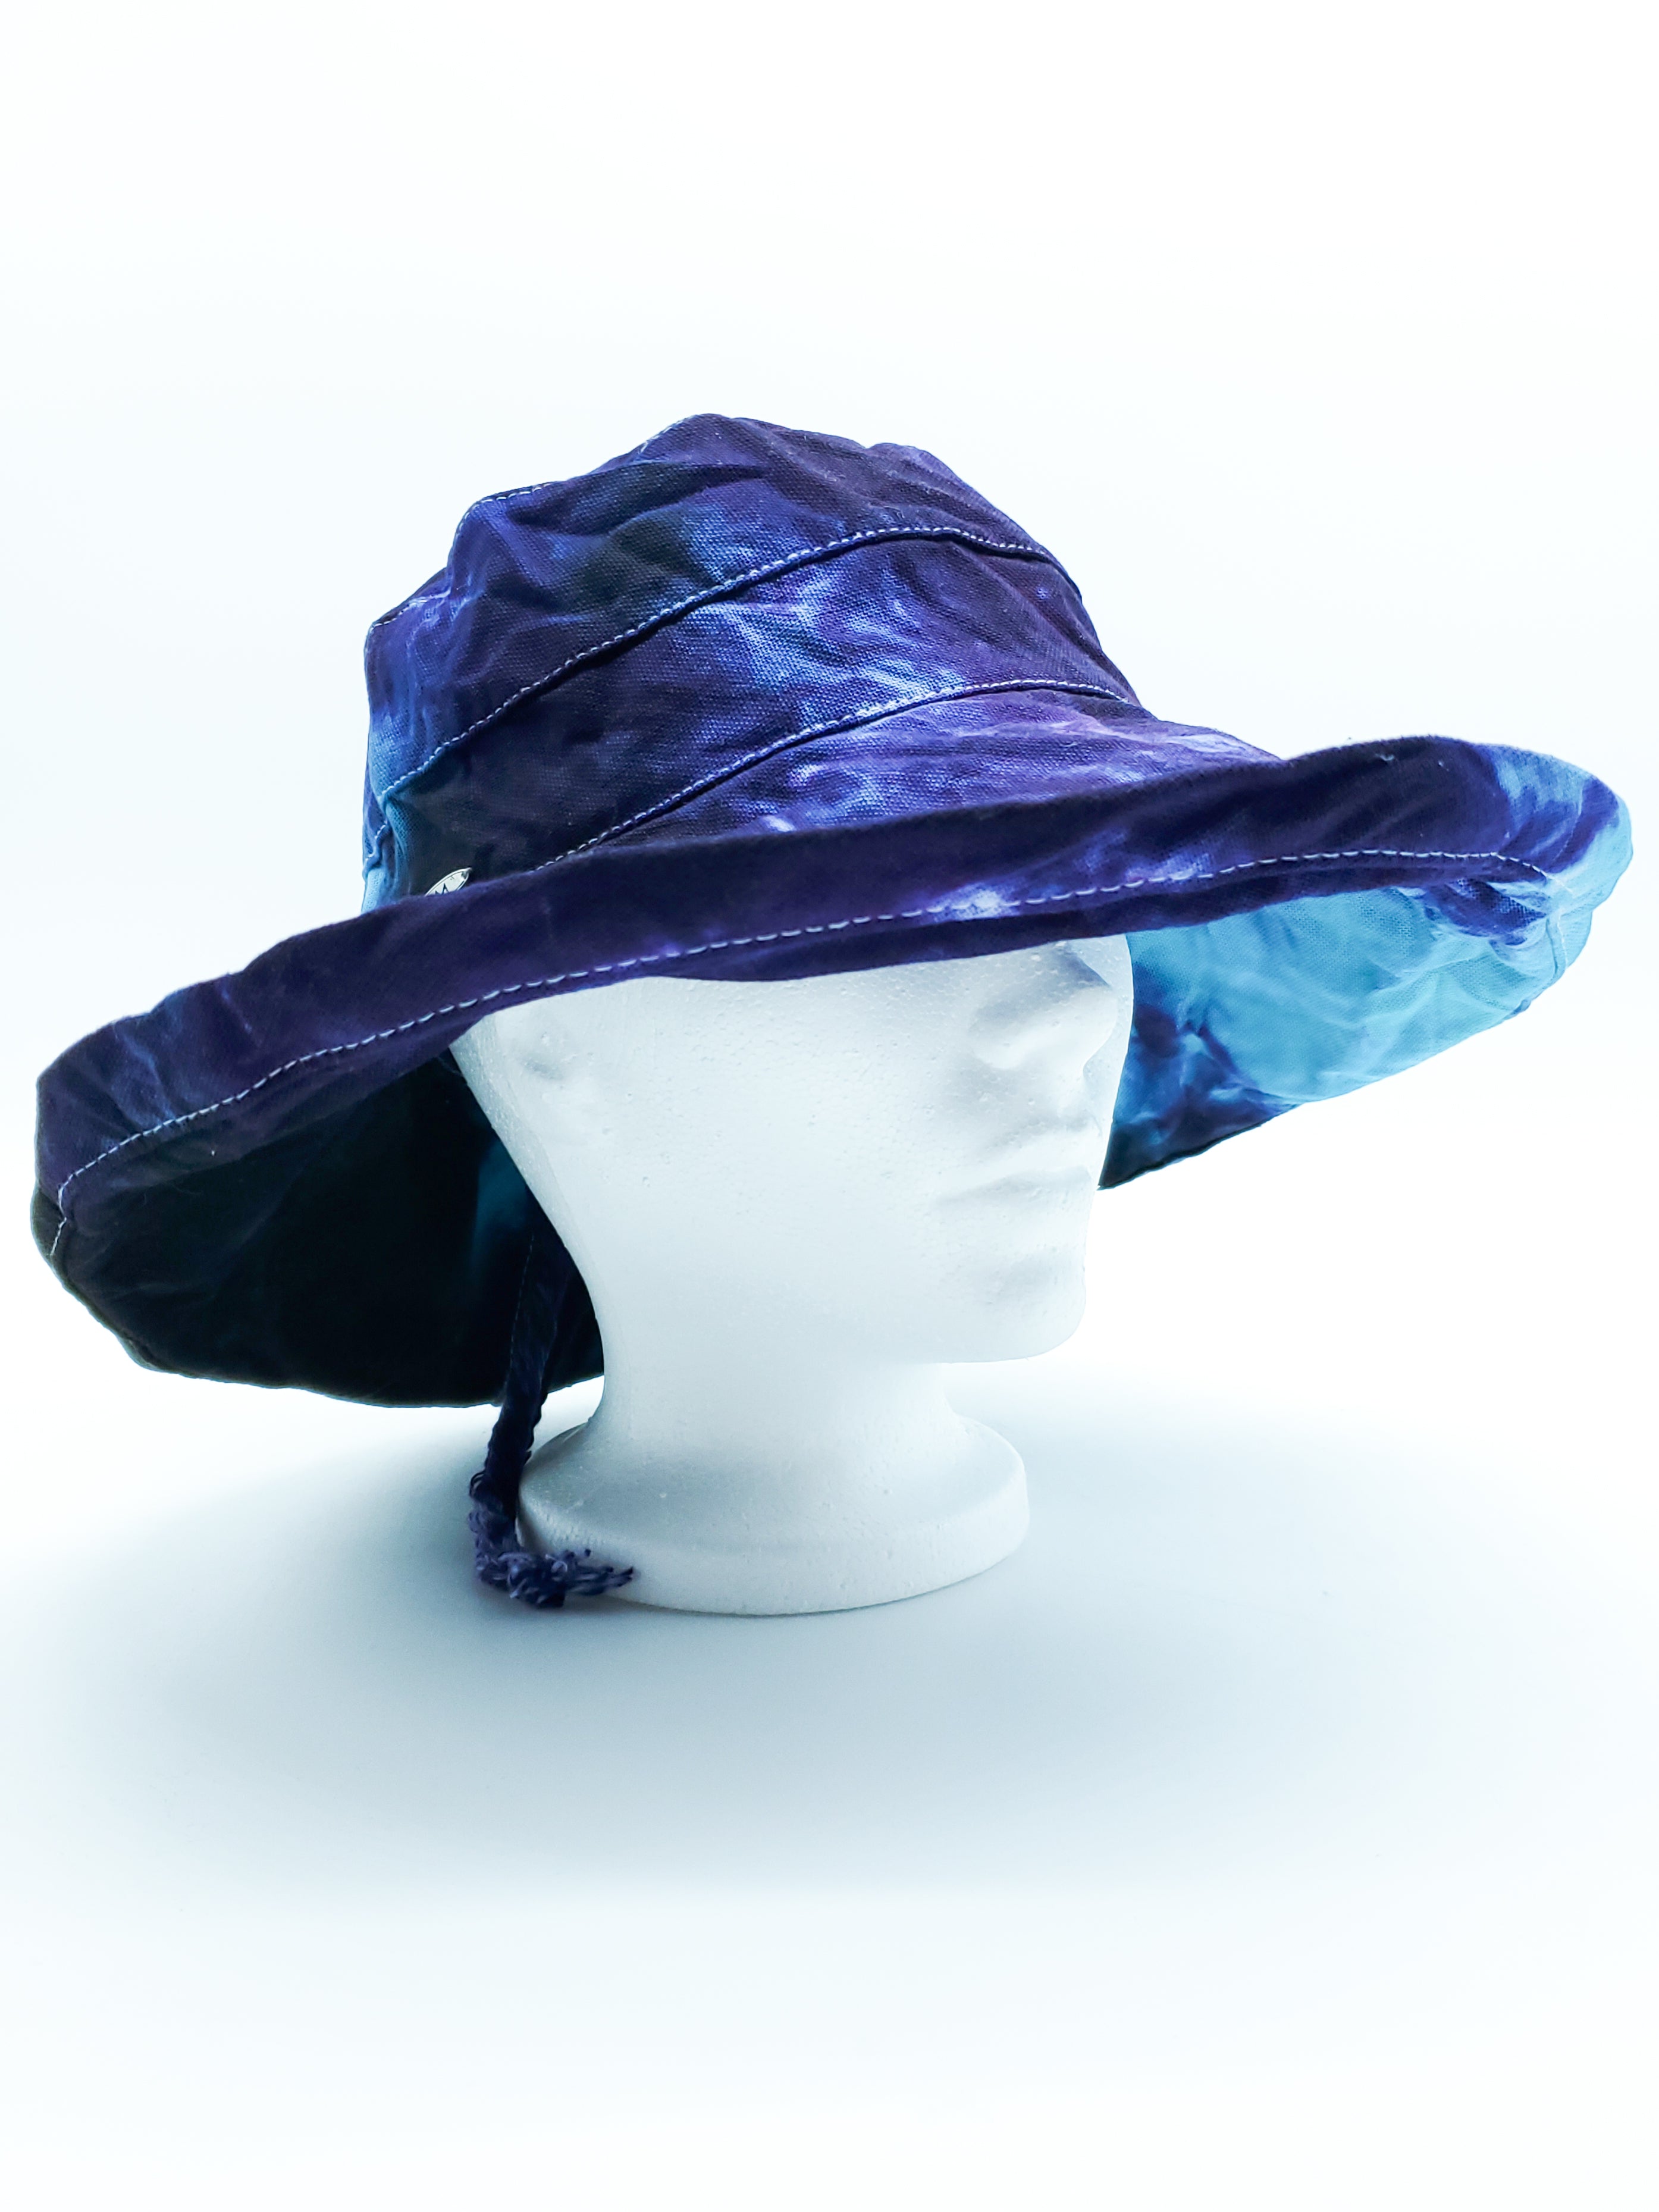 Adjustable Extra Wide Brim Tie Dyed Hat with Lining (O/S) - The Caffeinated Raven